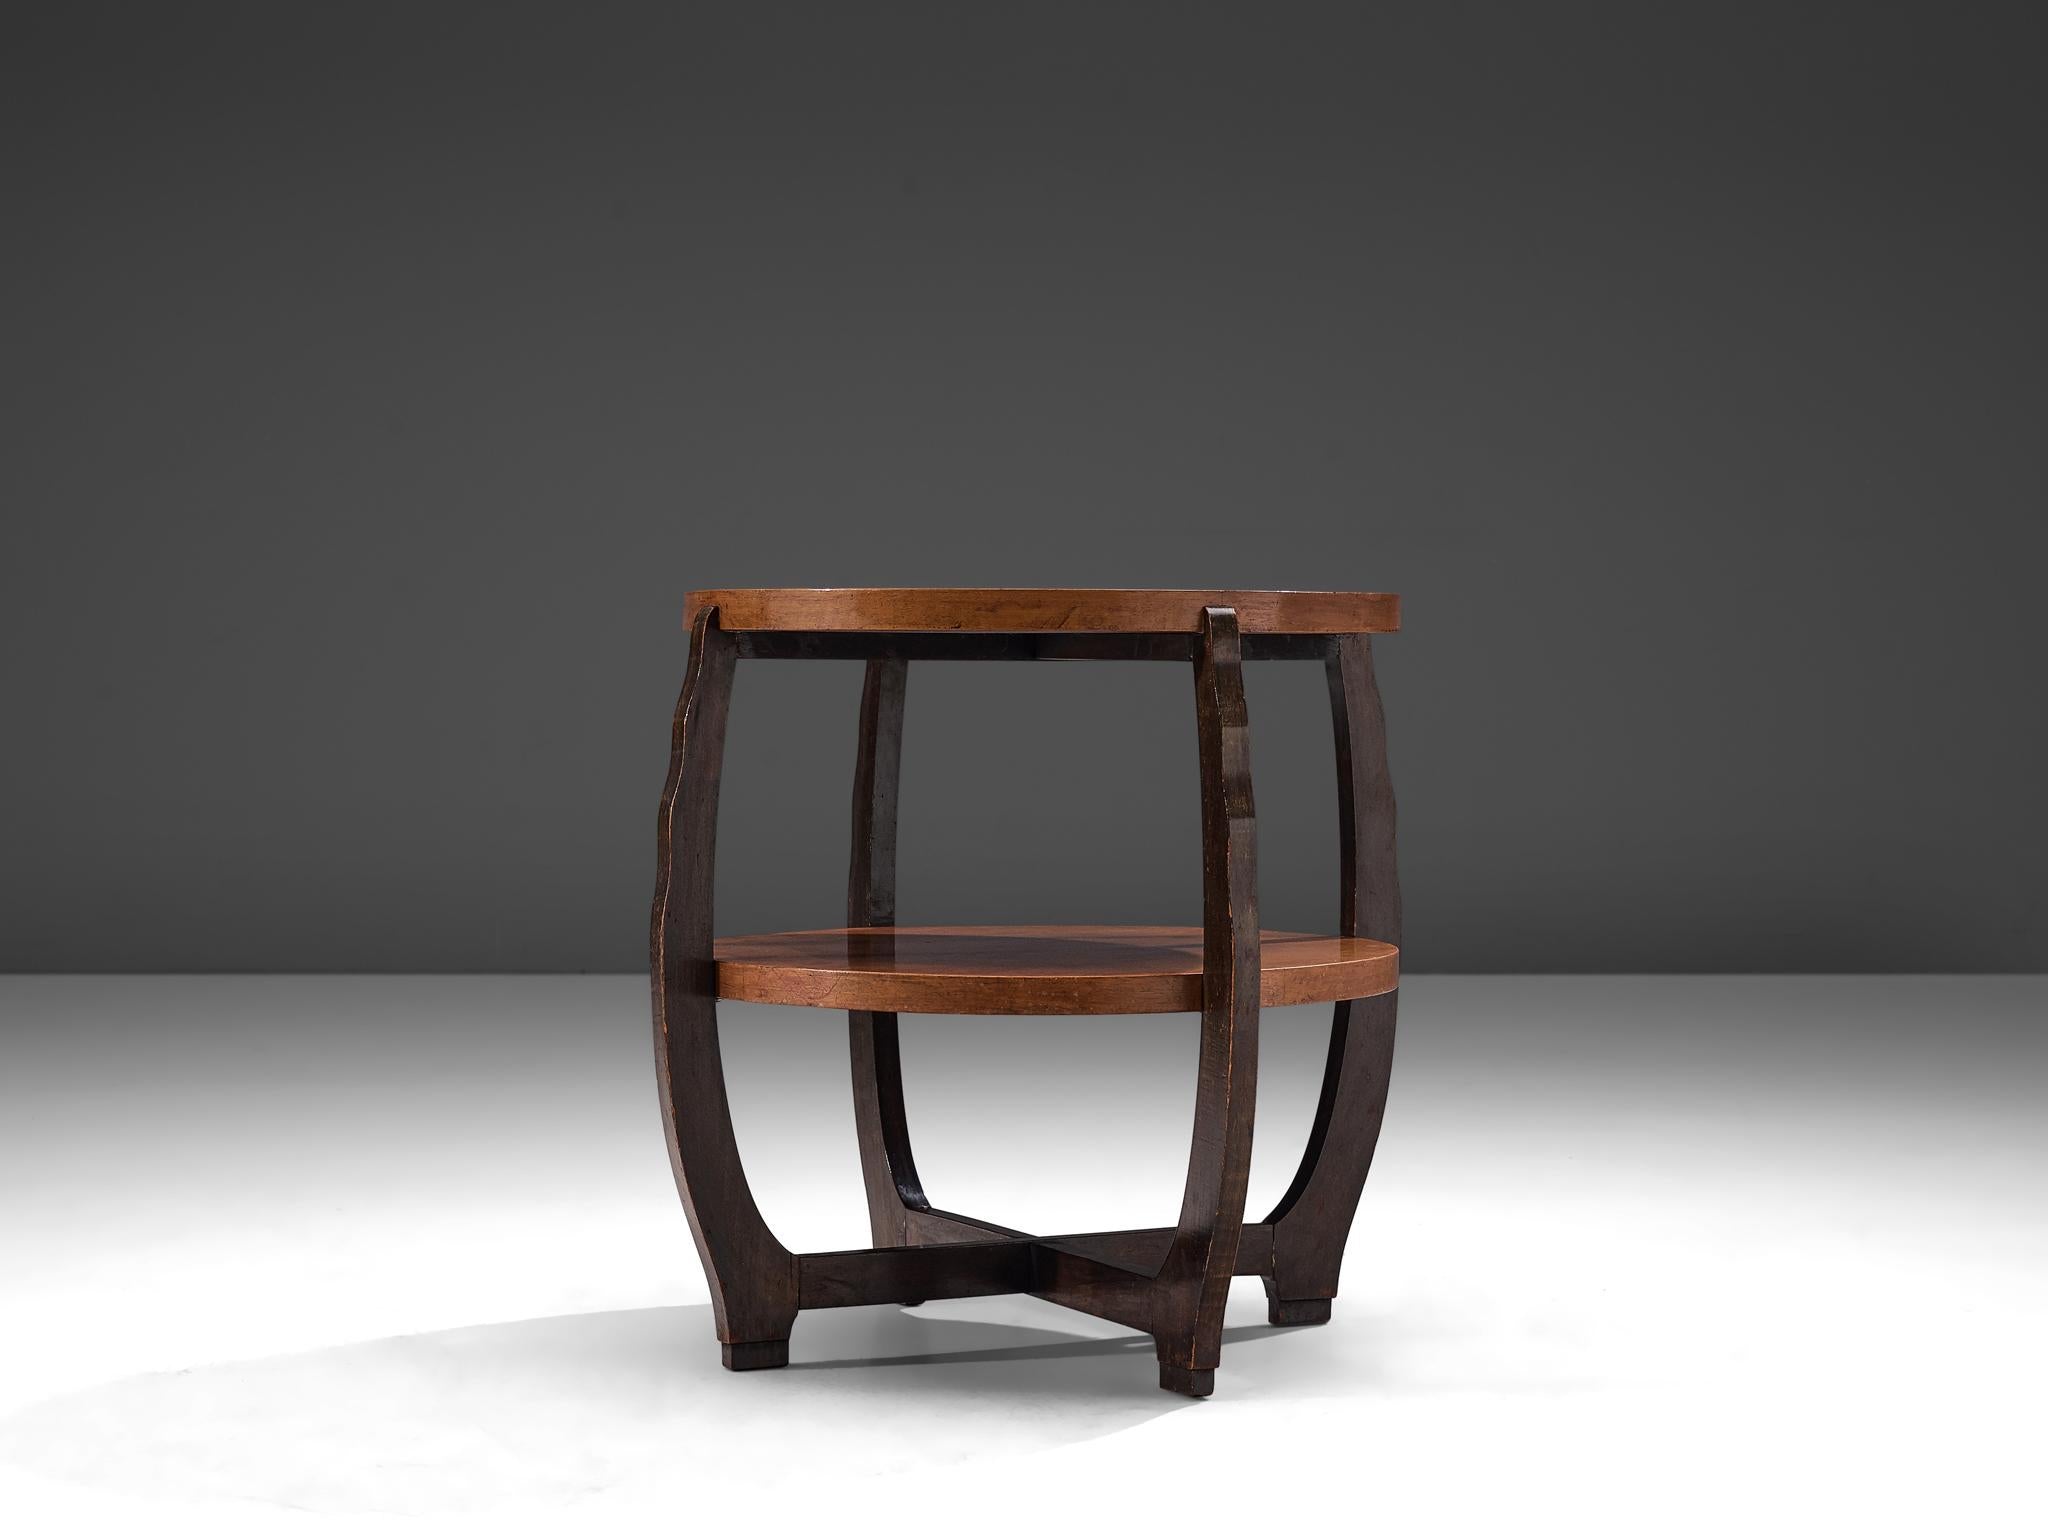 French Art Deco Side Table in Walnut